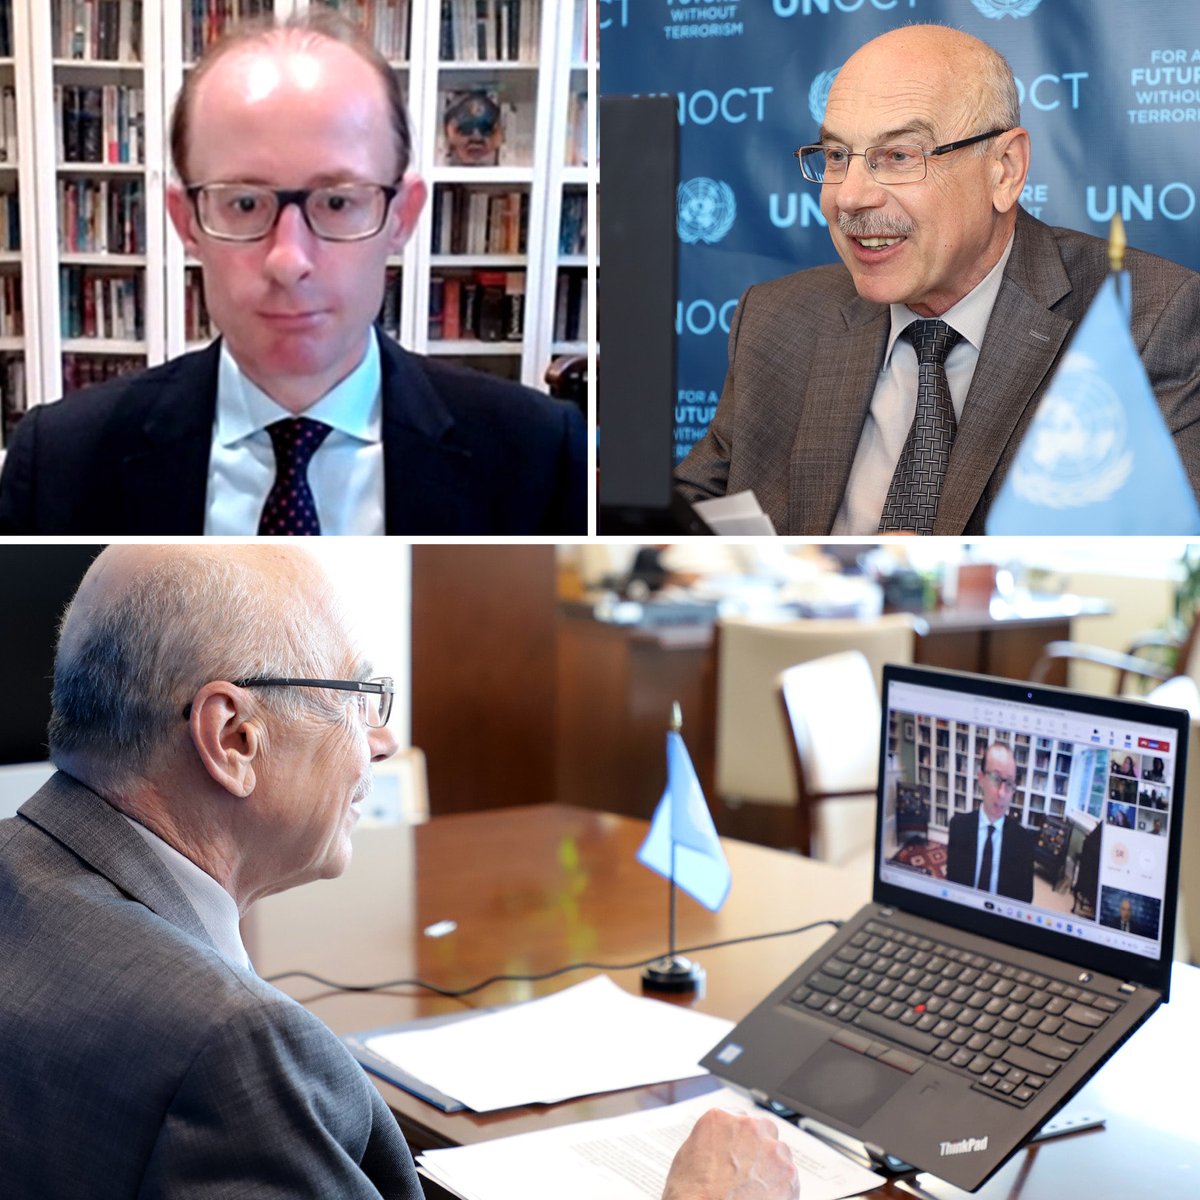 USG @un_oct Voronkov congratulated @profbensaul on his appointment as the new @un Special Rapporteur on #HumanRights and #CounterTerrorism. They discussed the Special Rapporteur's priorities for the coming years and committed to work together on issues of mutual interest.